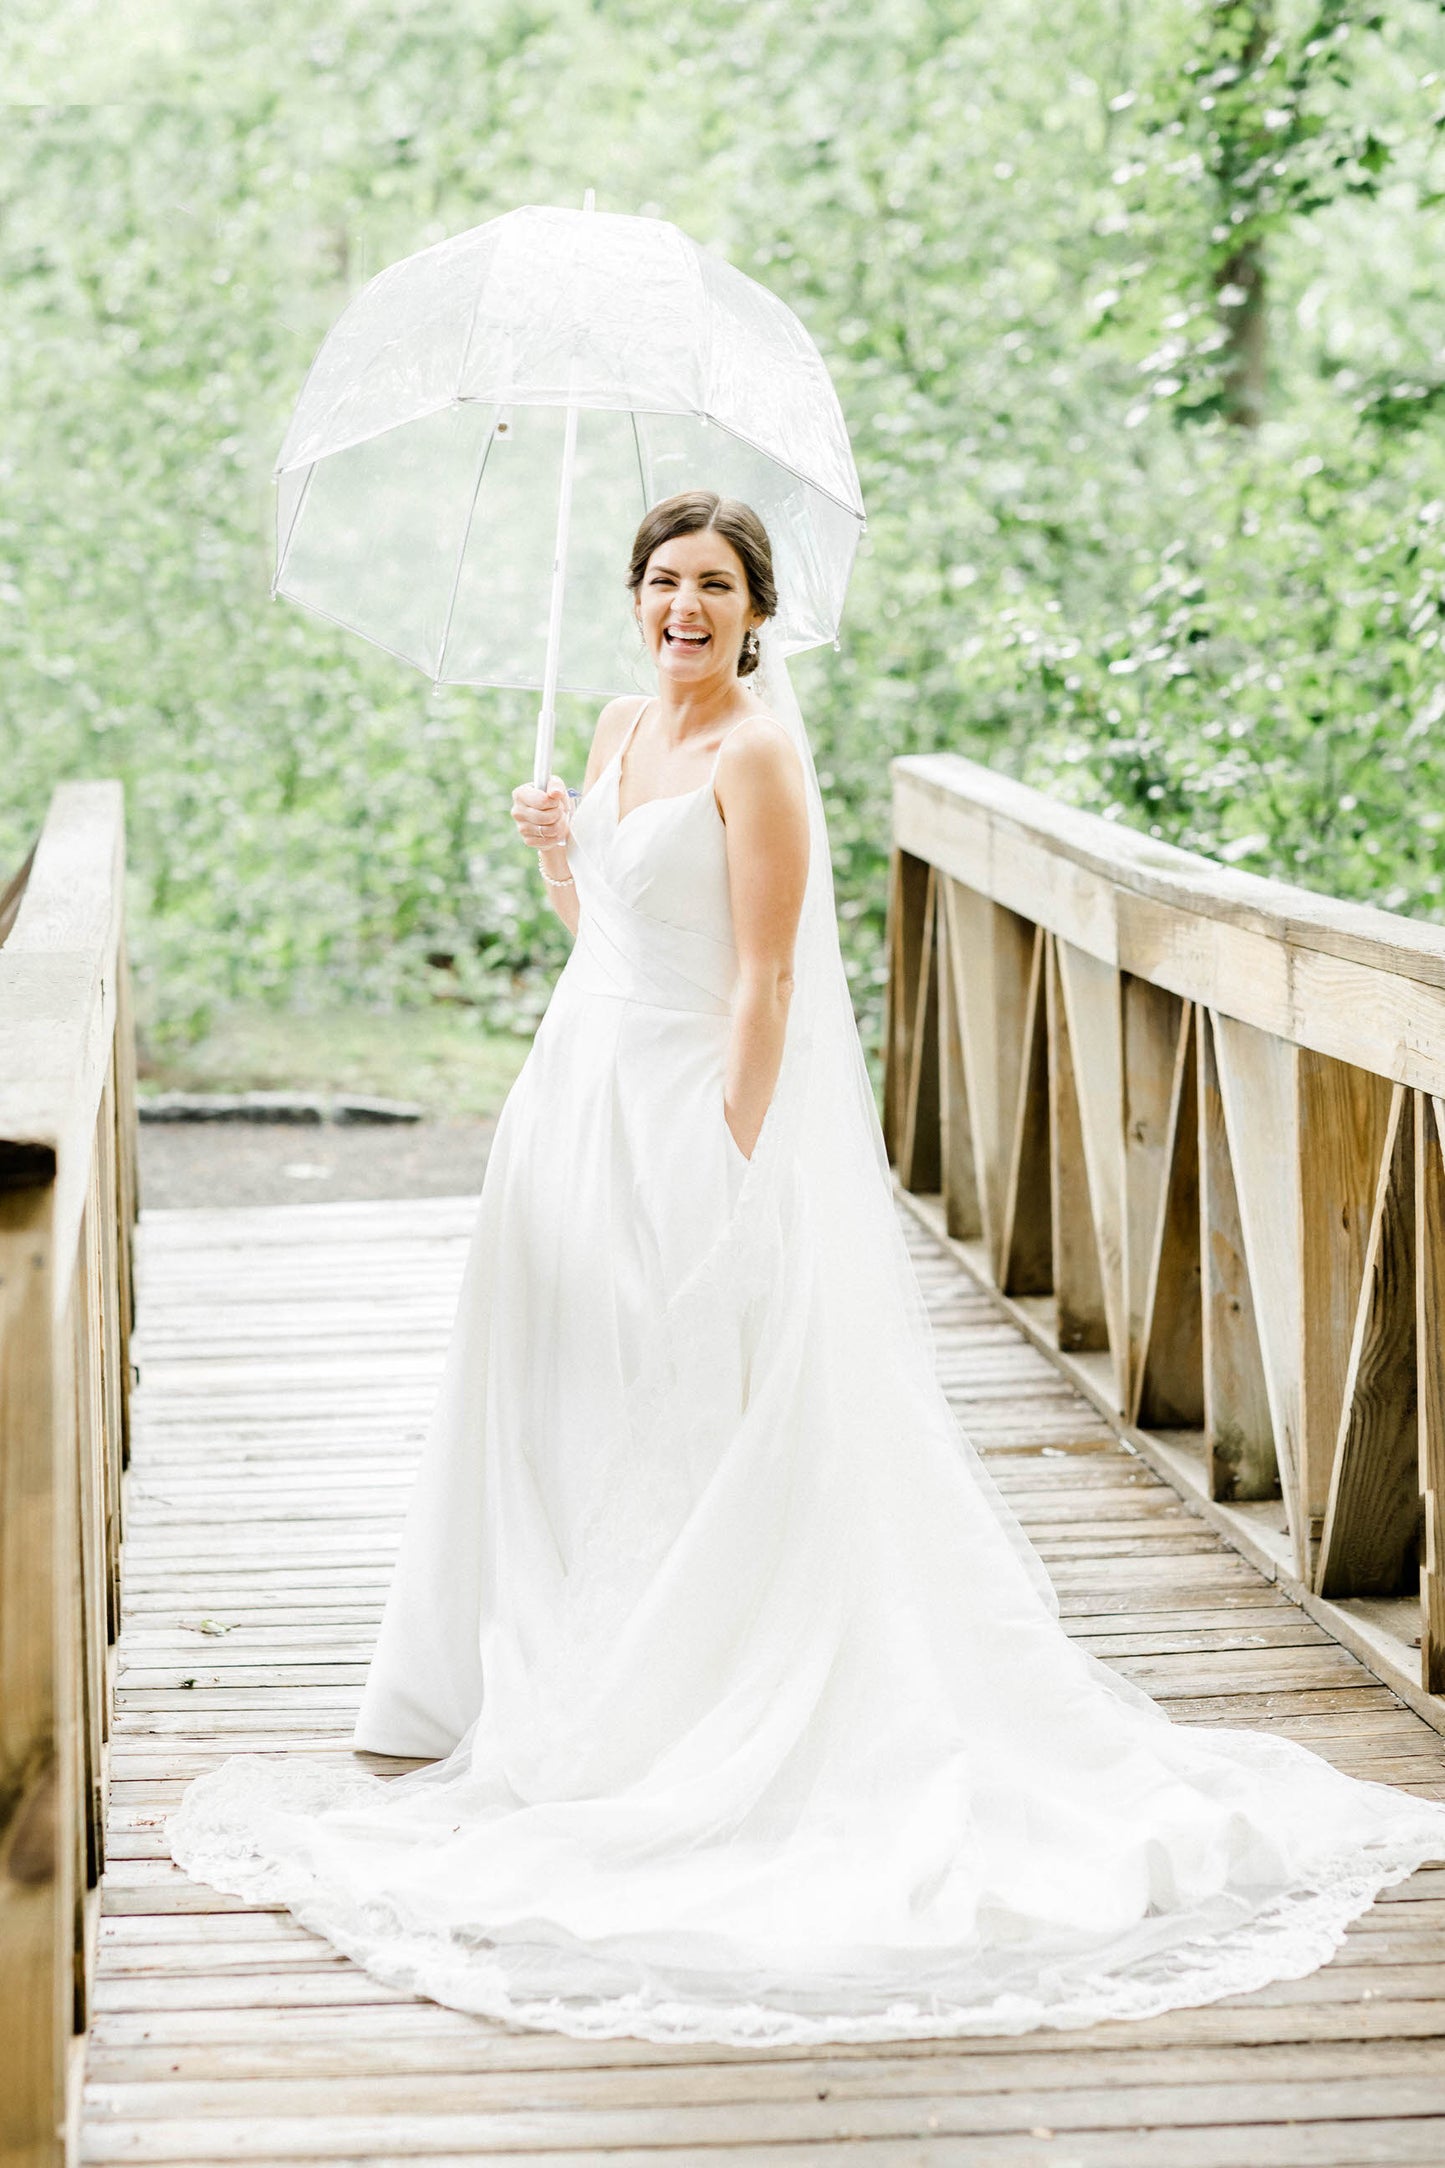 ballgown with pockets on bride wearing One Blushing Bride designer long cathedral length bridal veil with lace trim on bride under umbrella for rainy wedding day